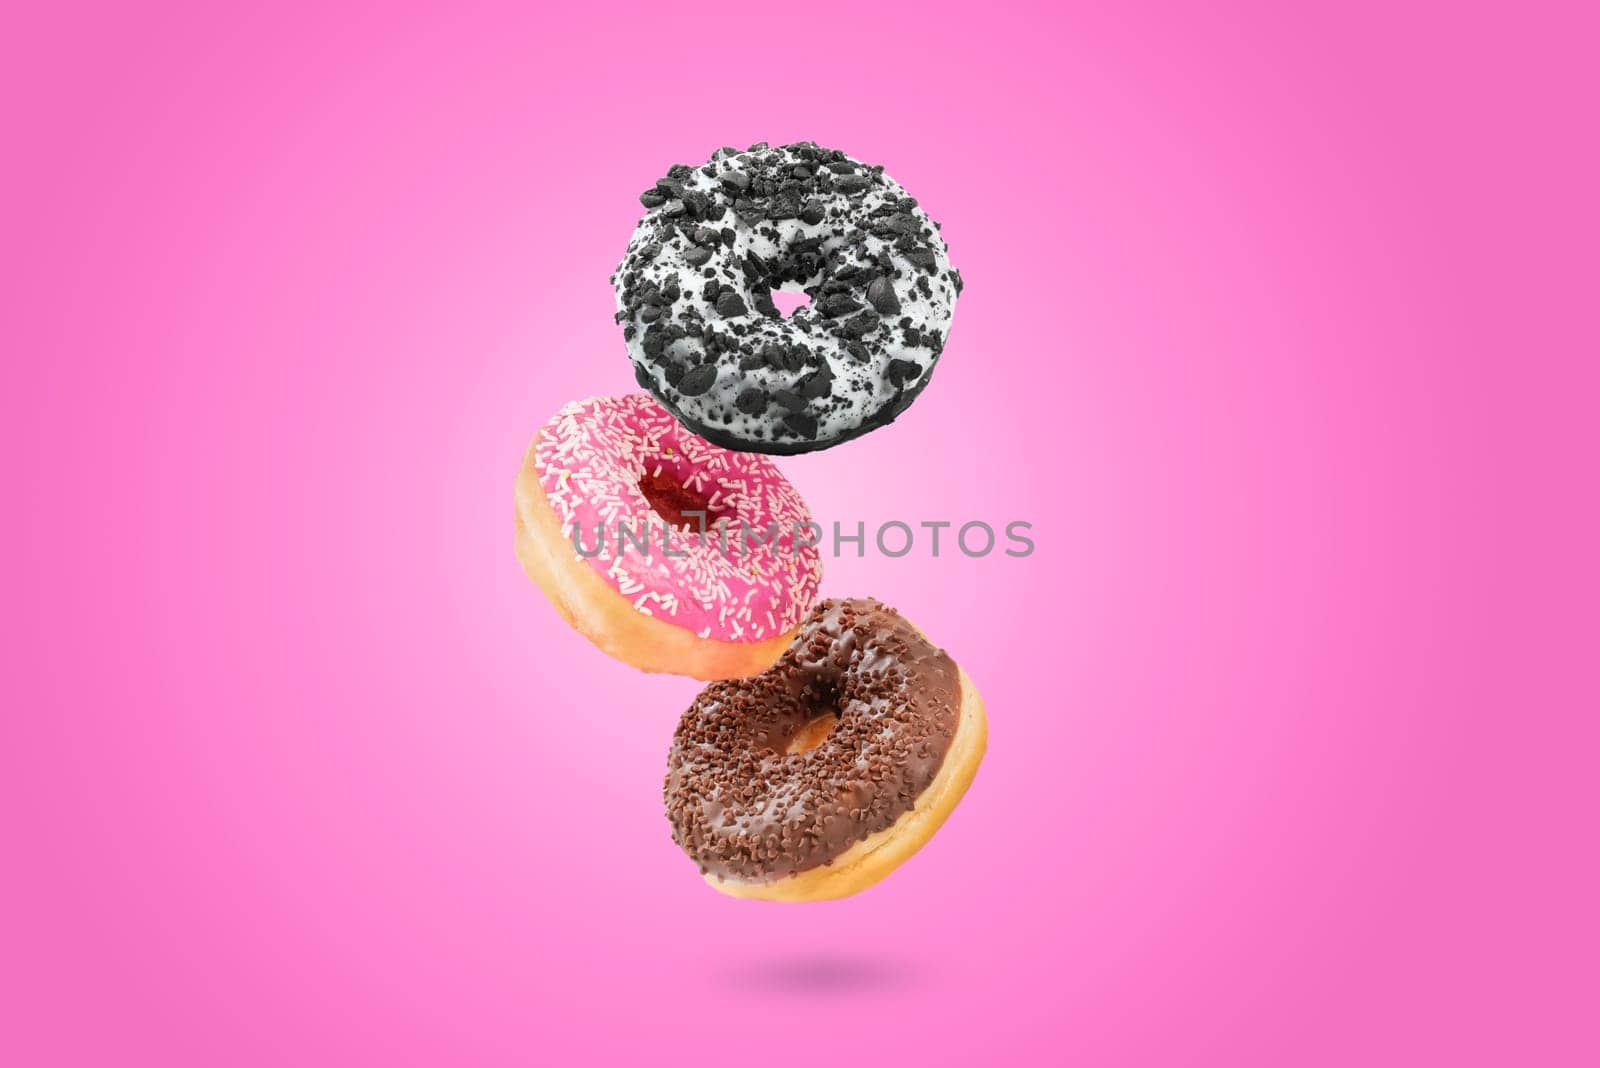 Delicious donut on color background by simpson33